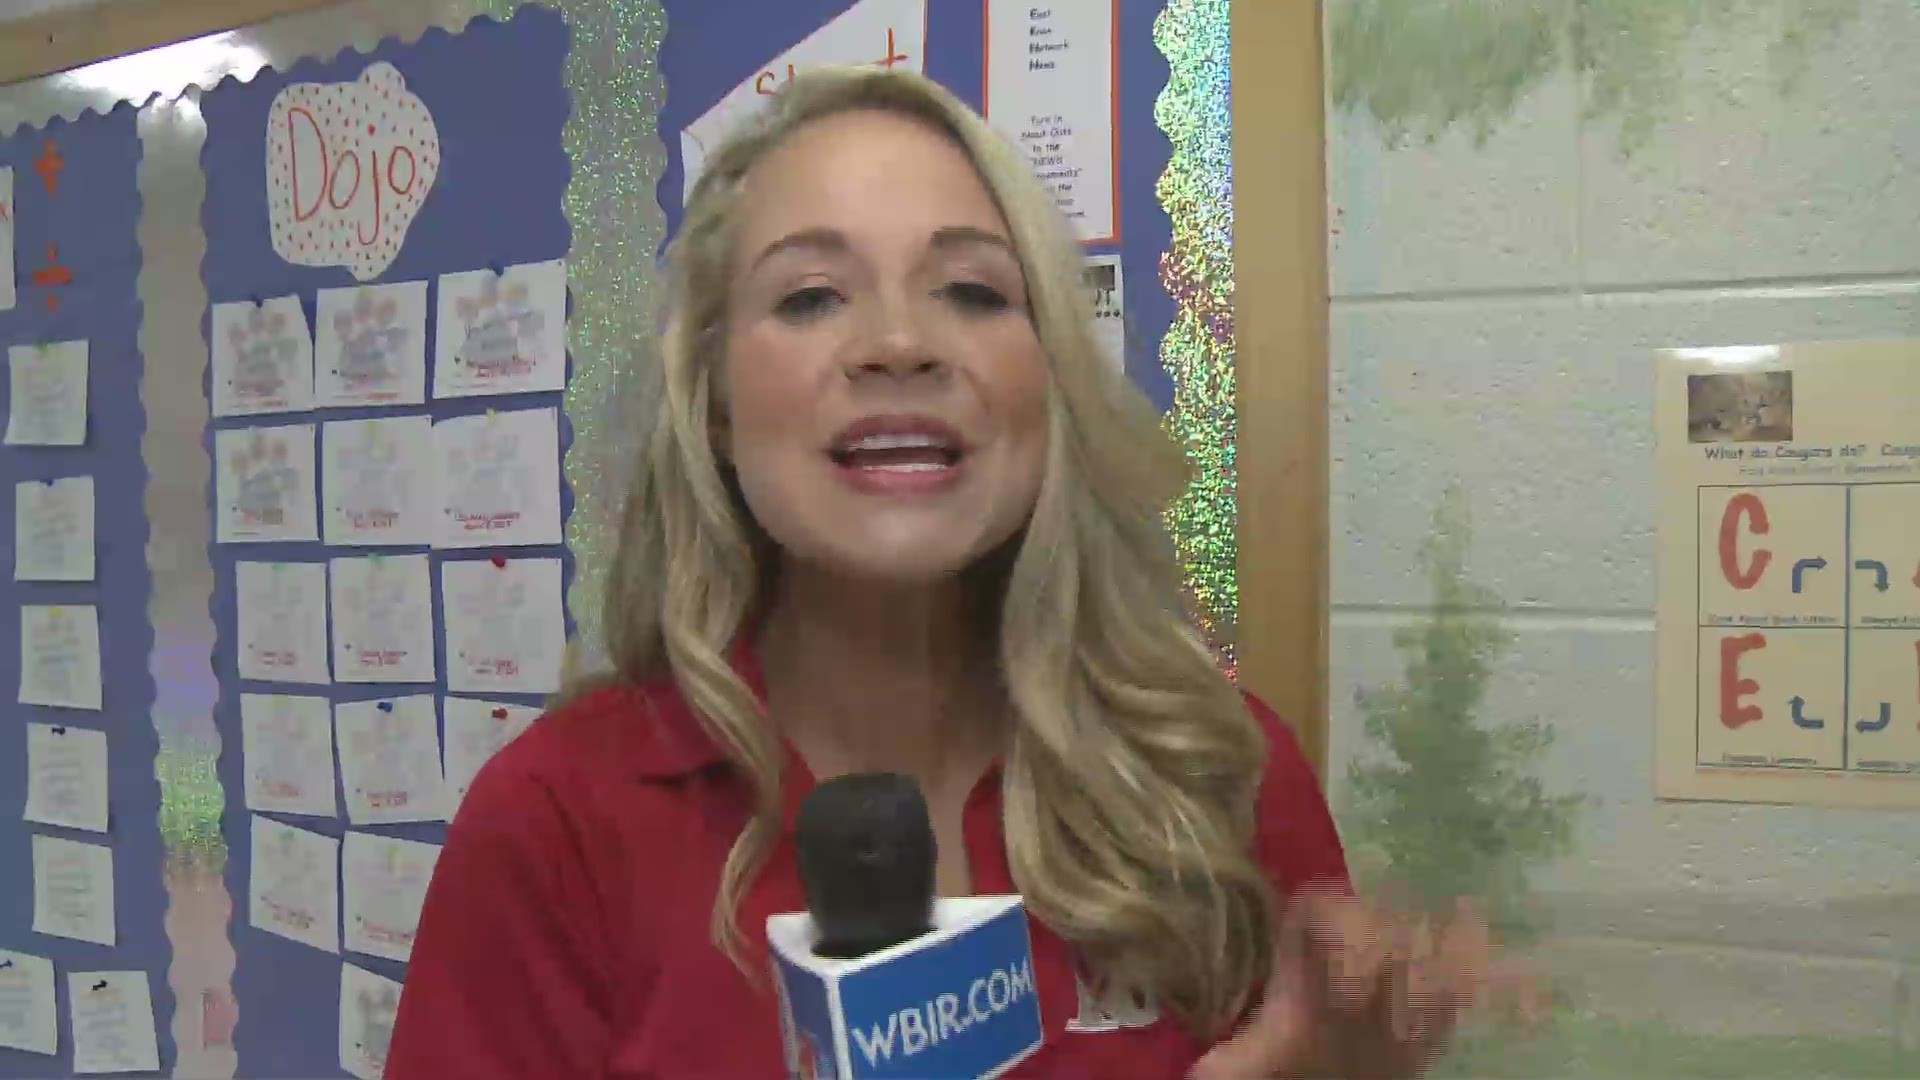 10News Meteorologist Rebecca Sweet took a look at this cool school on April 17.